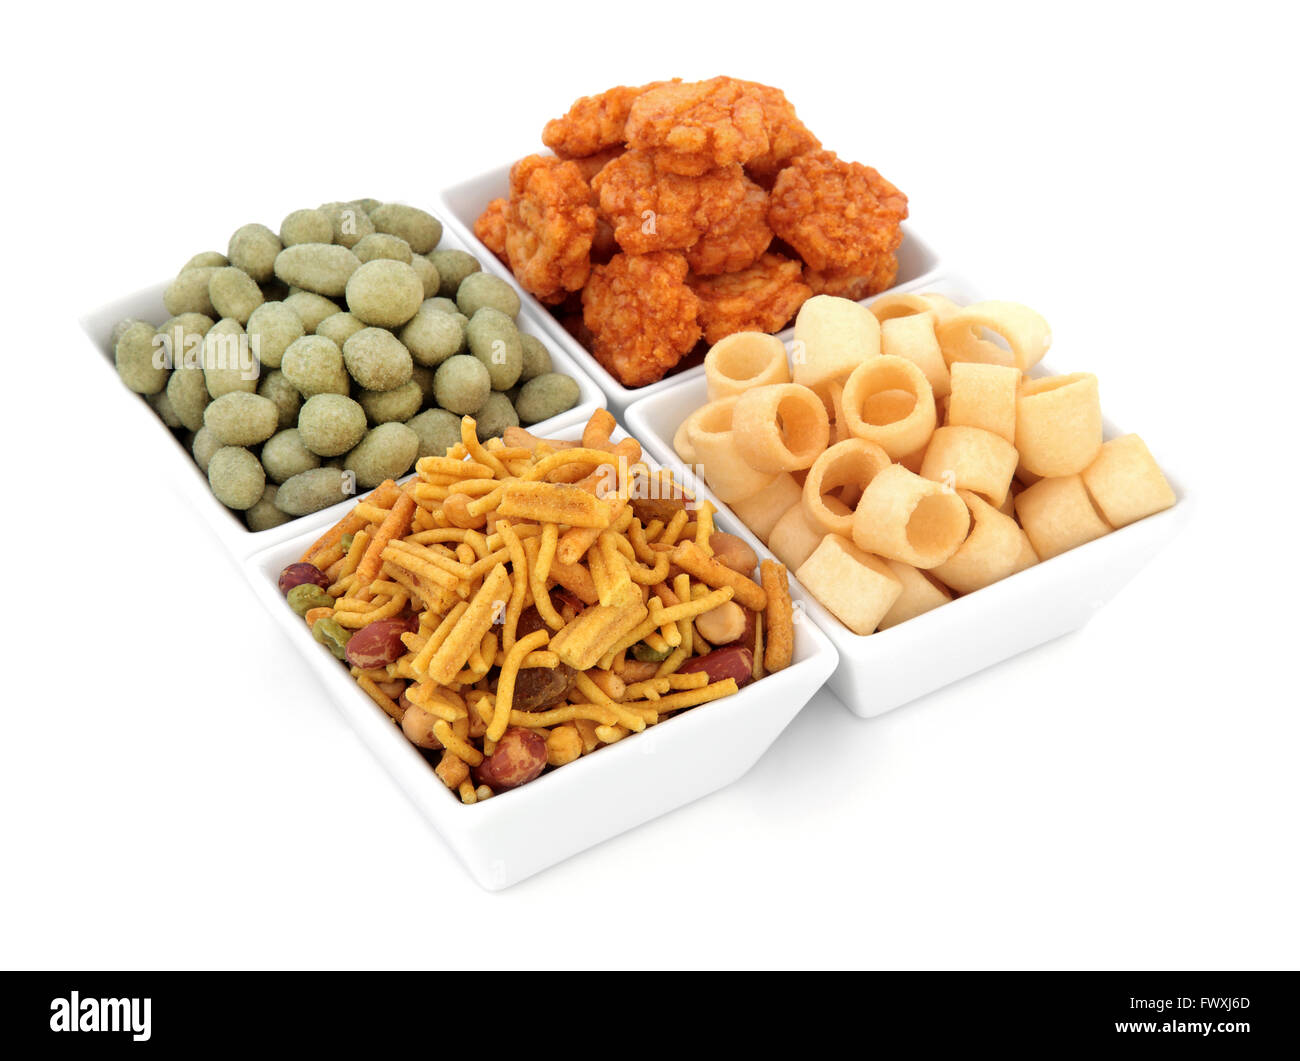 Savory snack party food selection in square porcelain bowls over white background. Stock Photo